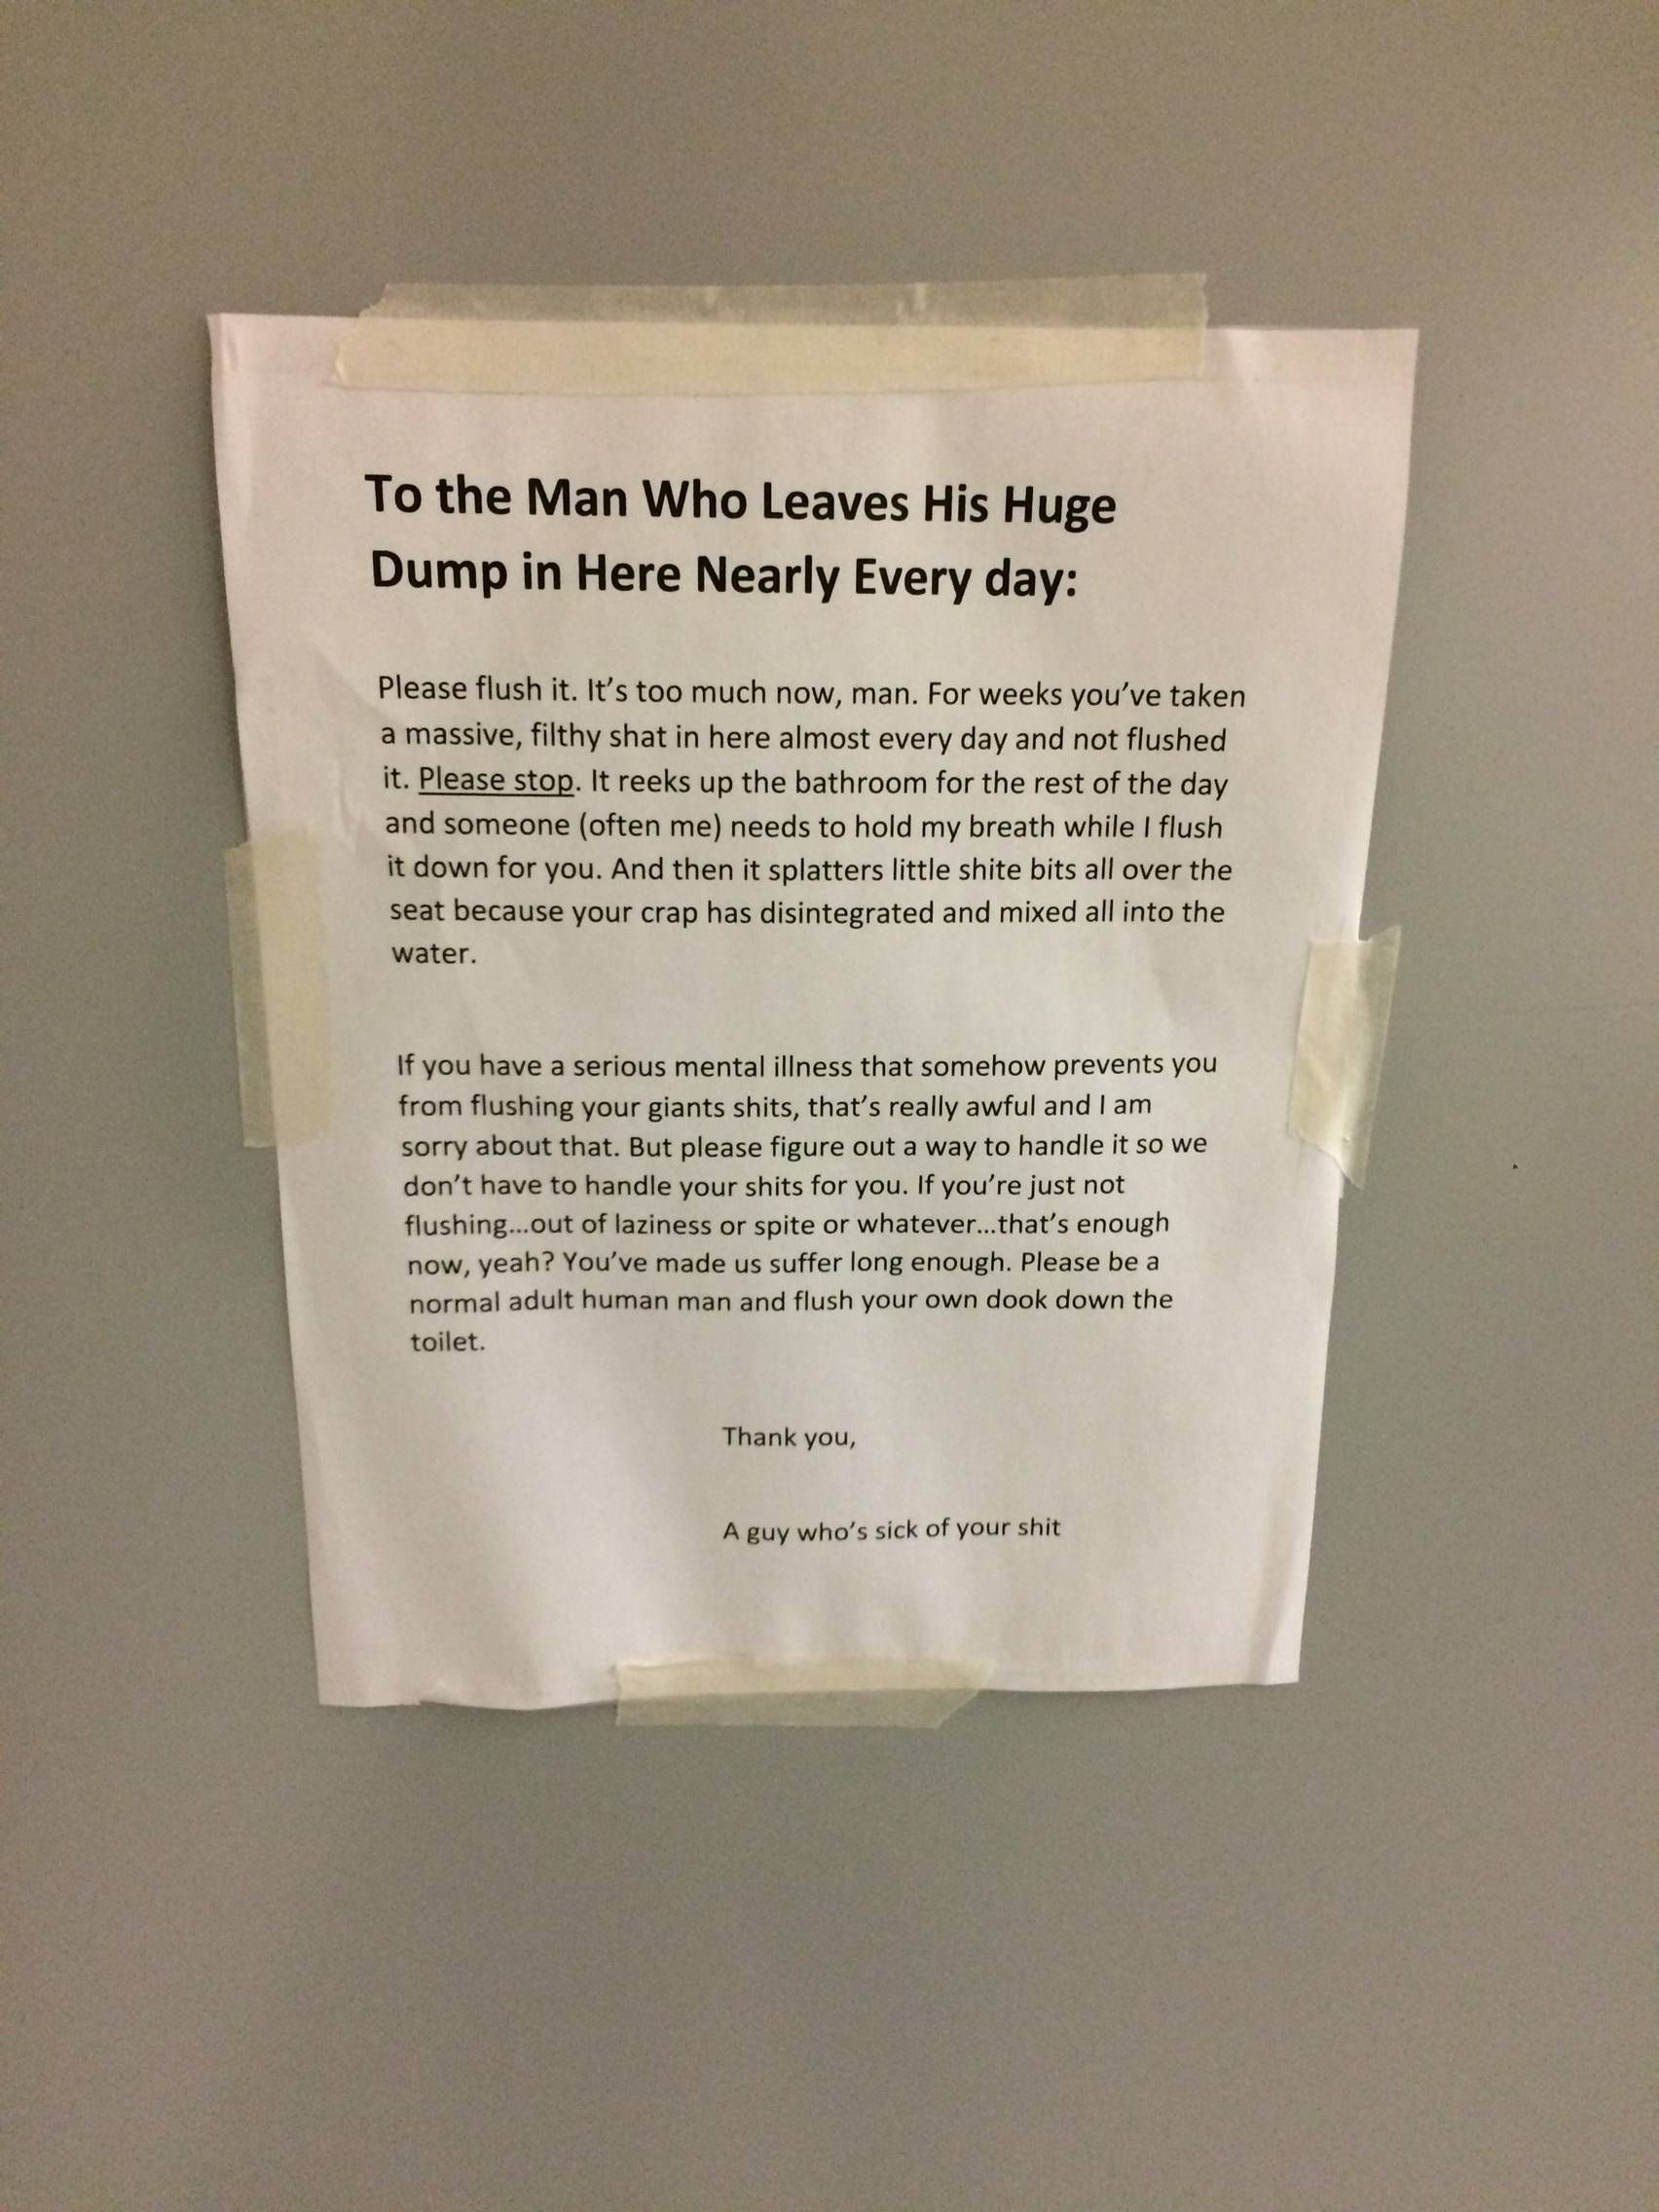 Someone at my office has had enough of someone else’s shit